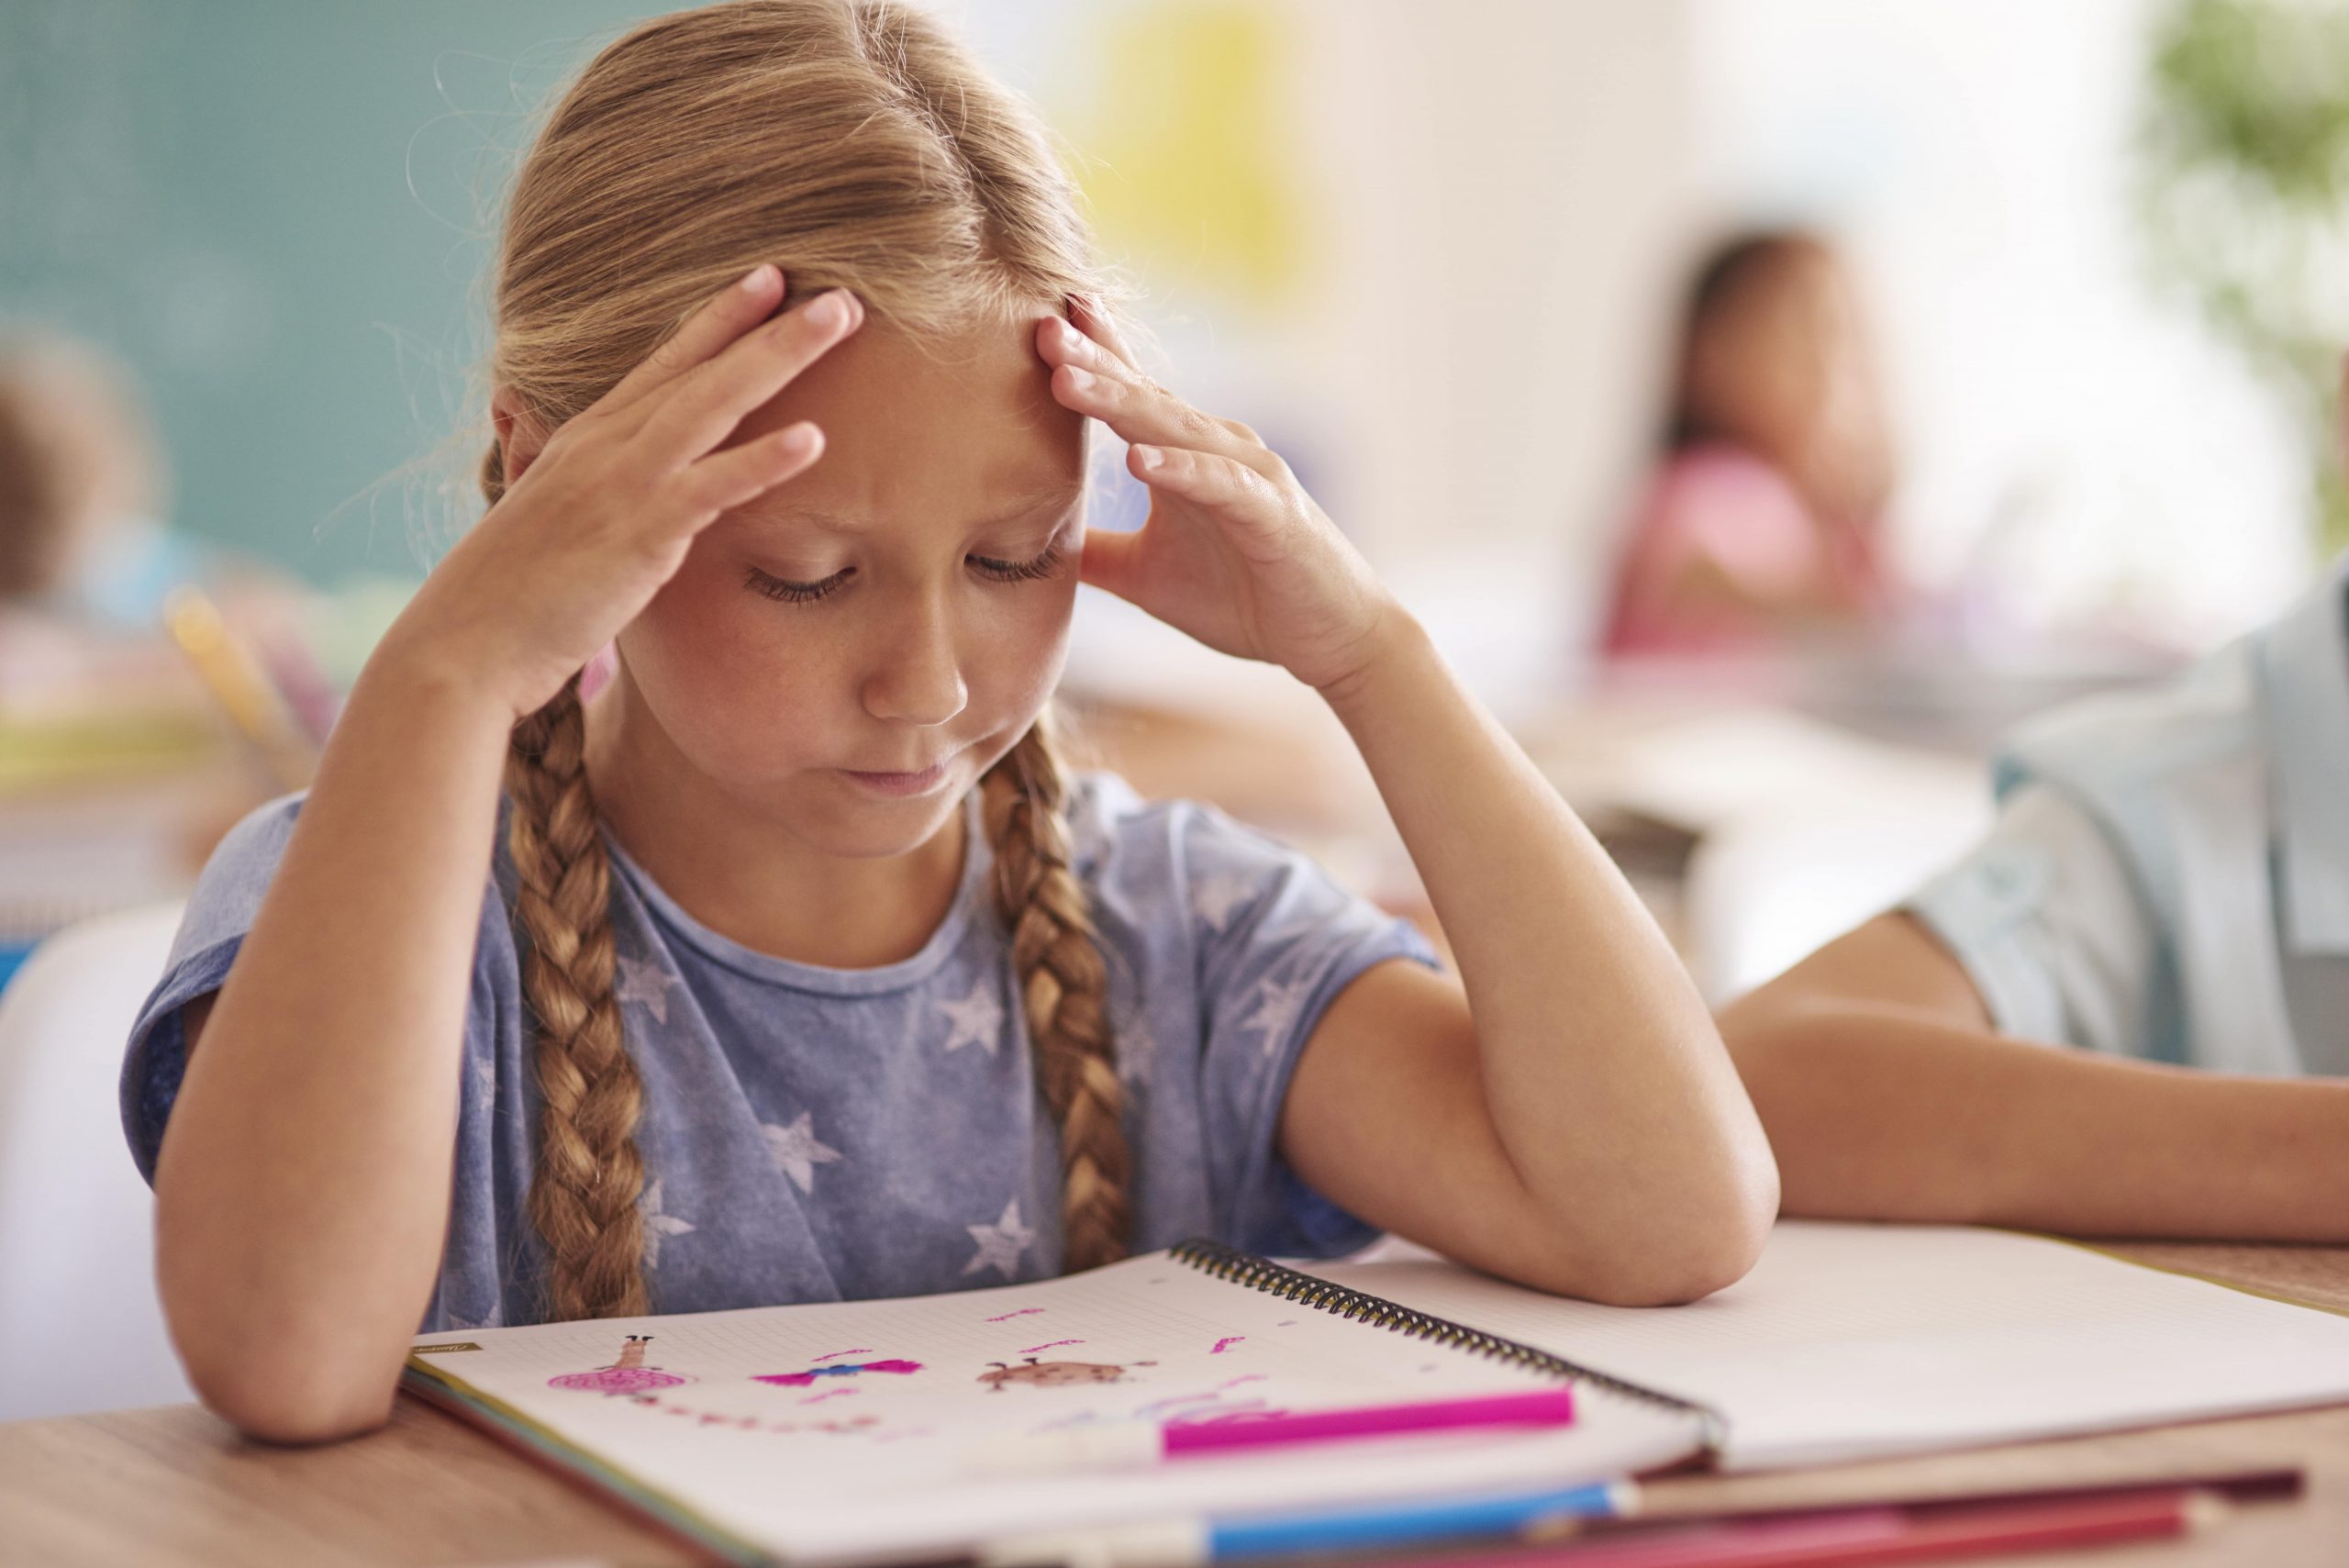 Anxiety in the Classroom